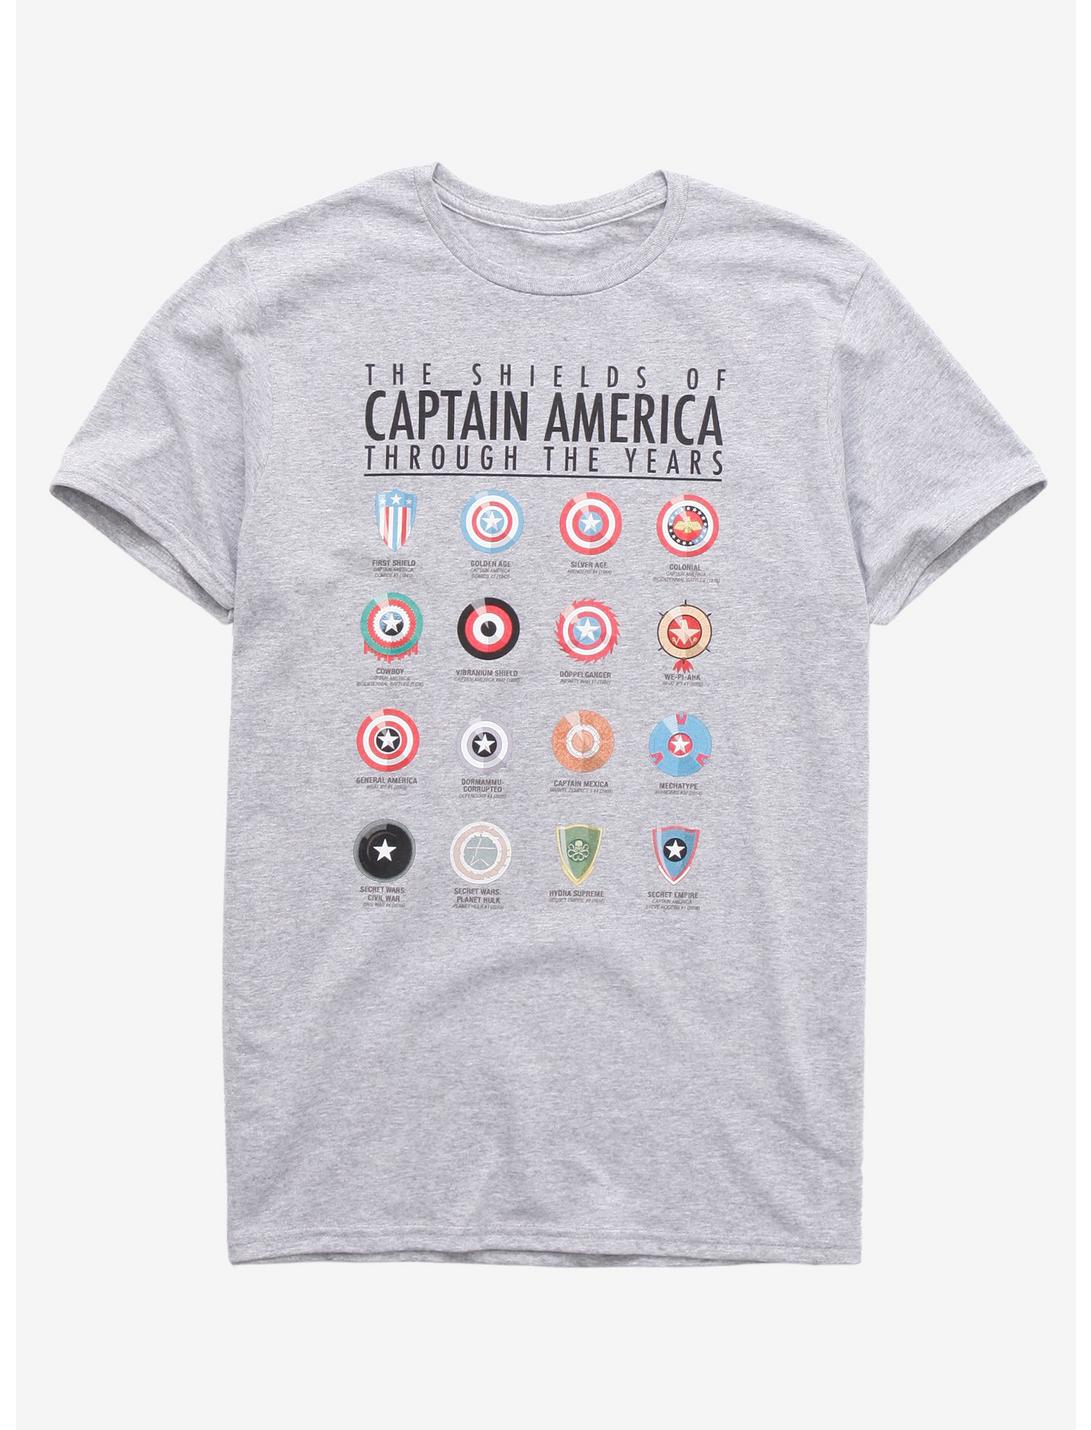 Captain America Cute Marvel Printed Toddler Tee T Shirt 2T 3T 4T Free Shipping